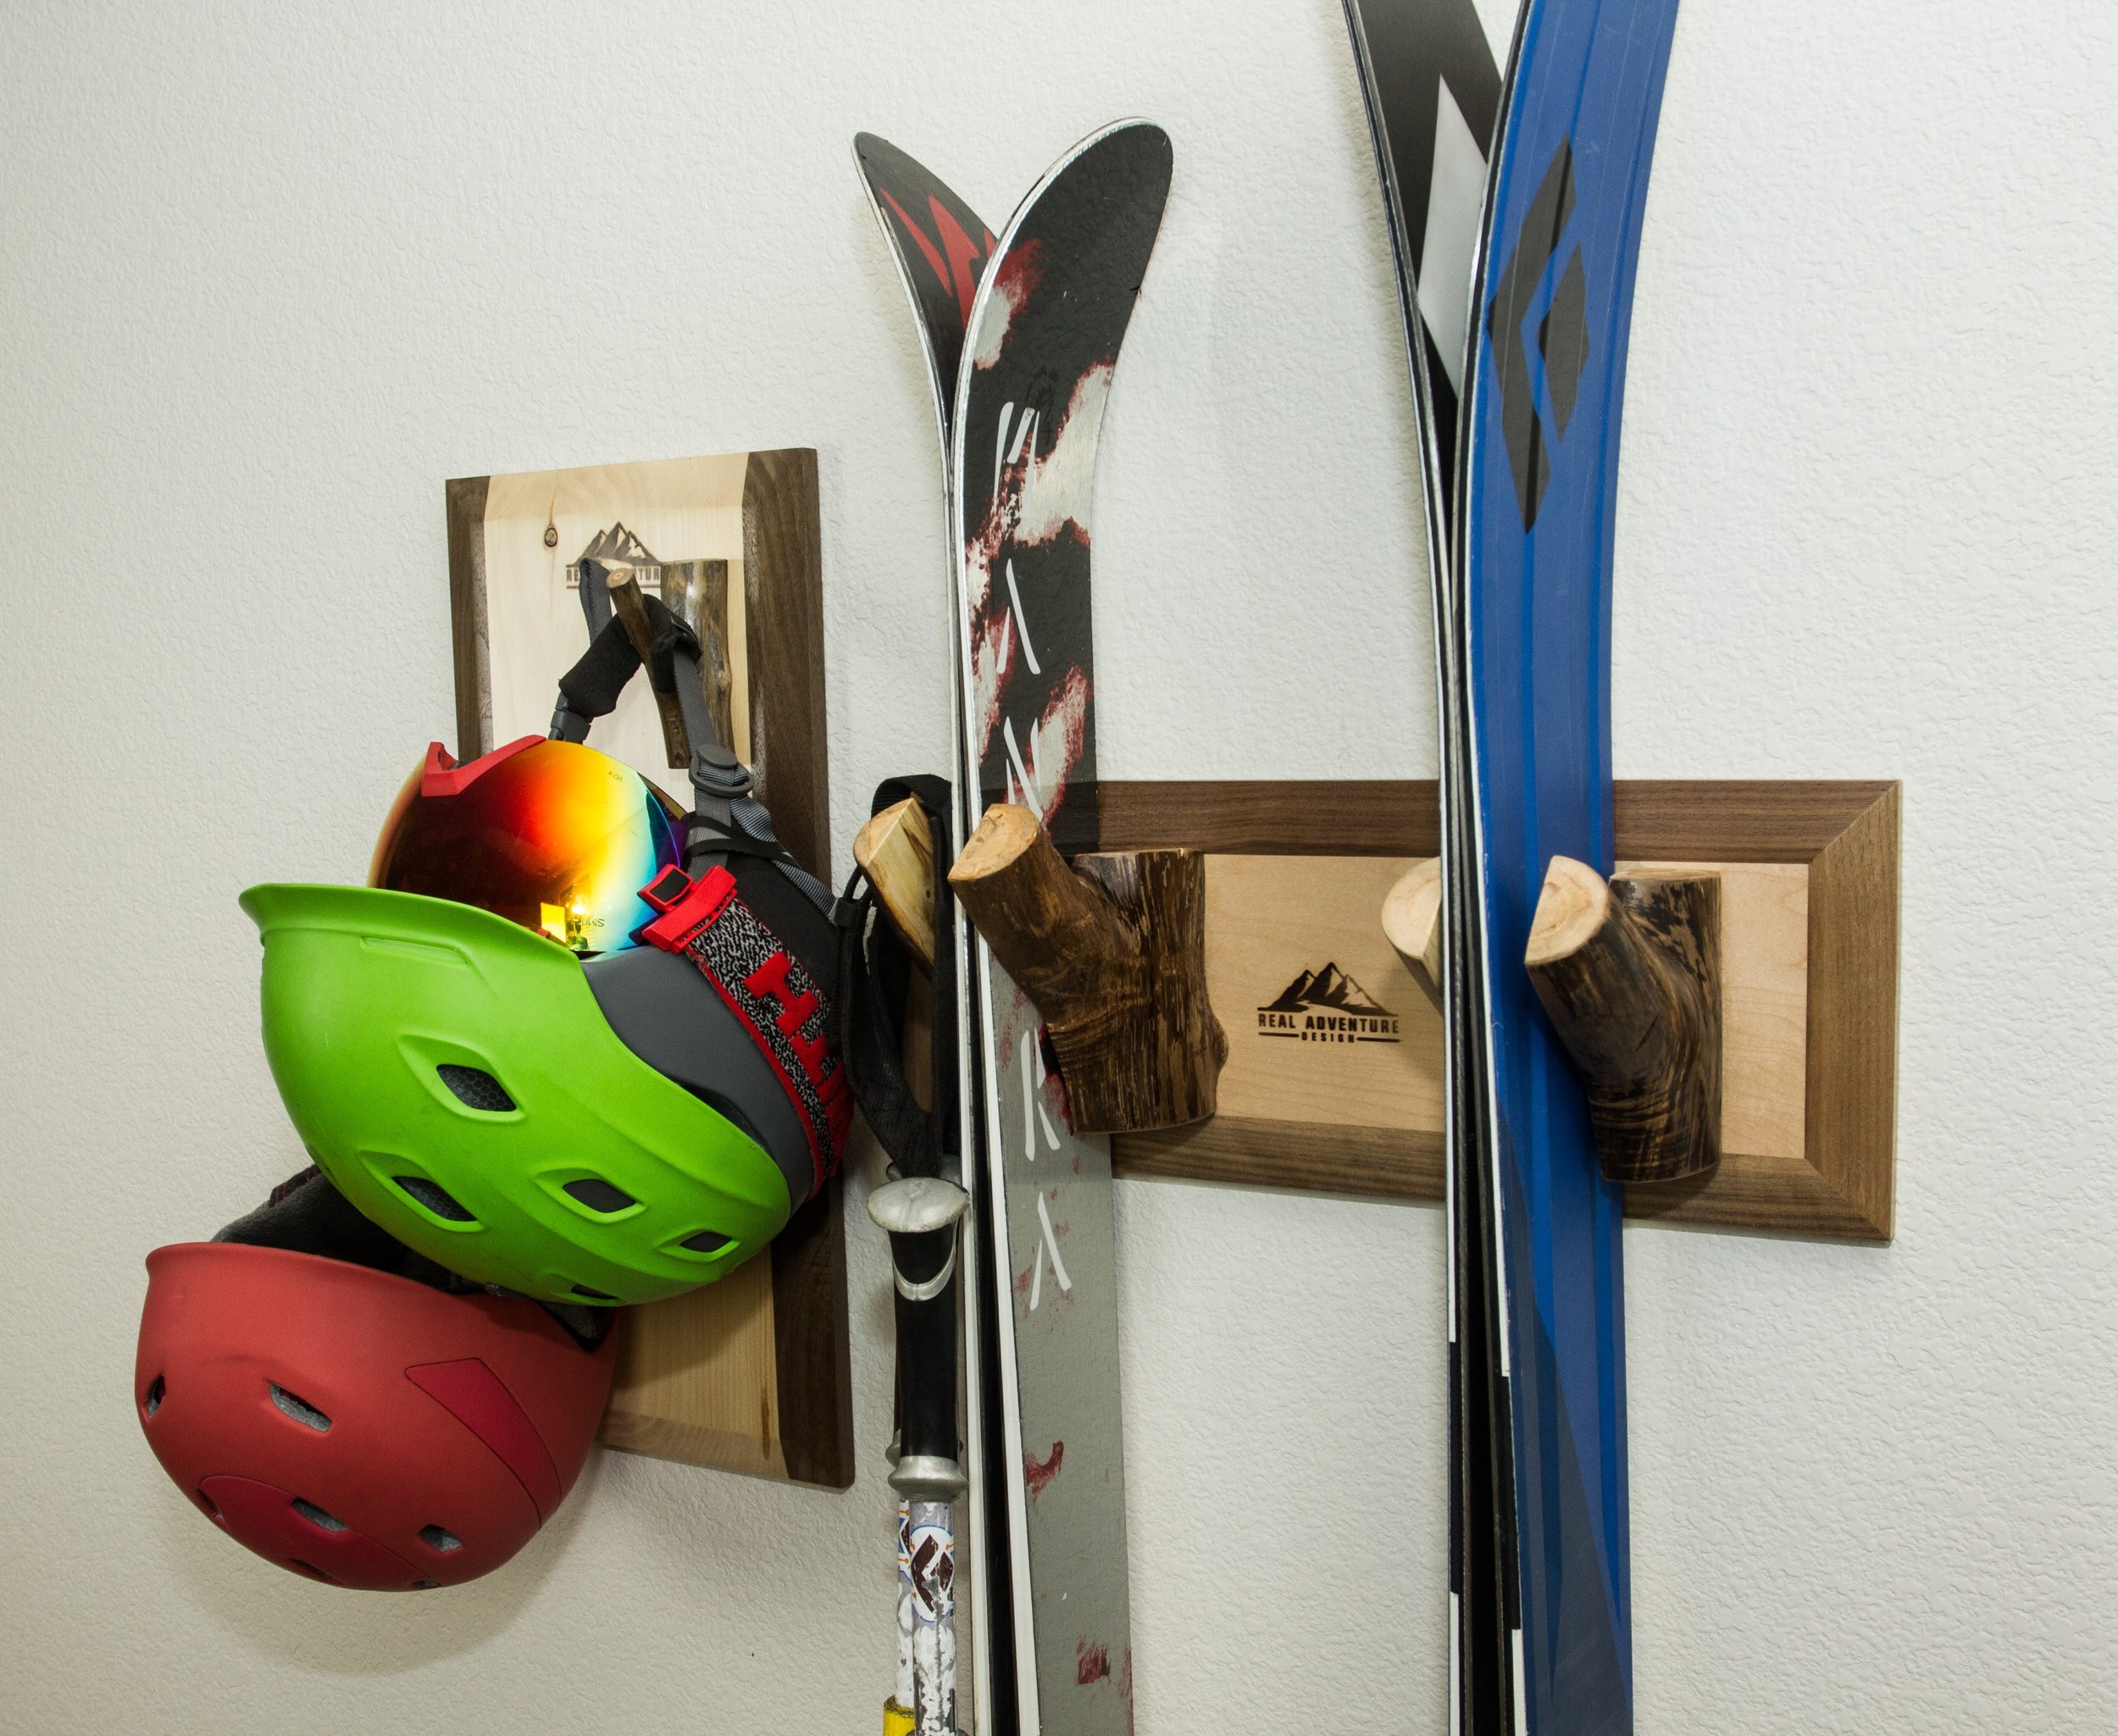  The Meaden ski rack pairs perfectly with the Fish Creek helmet rack. 